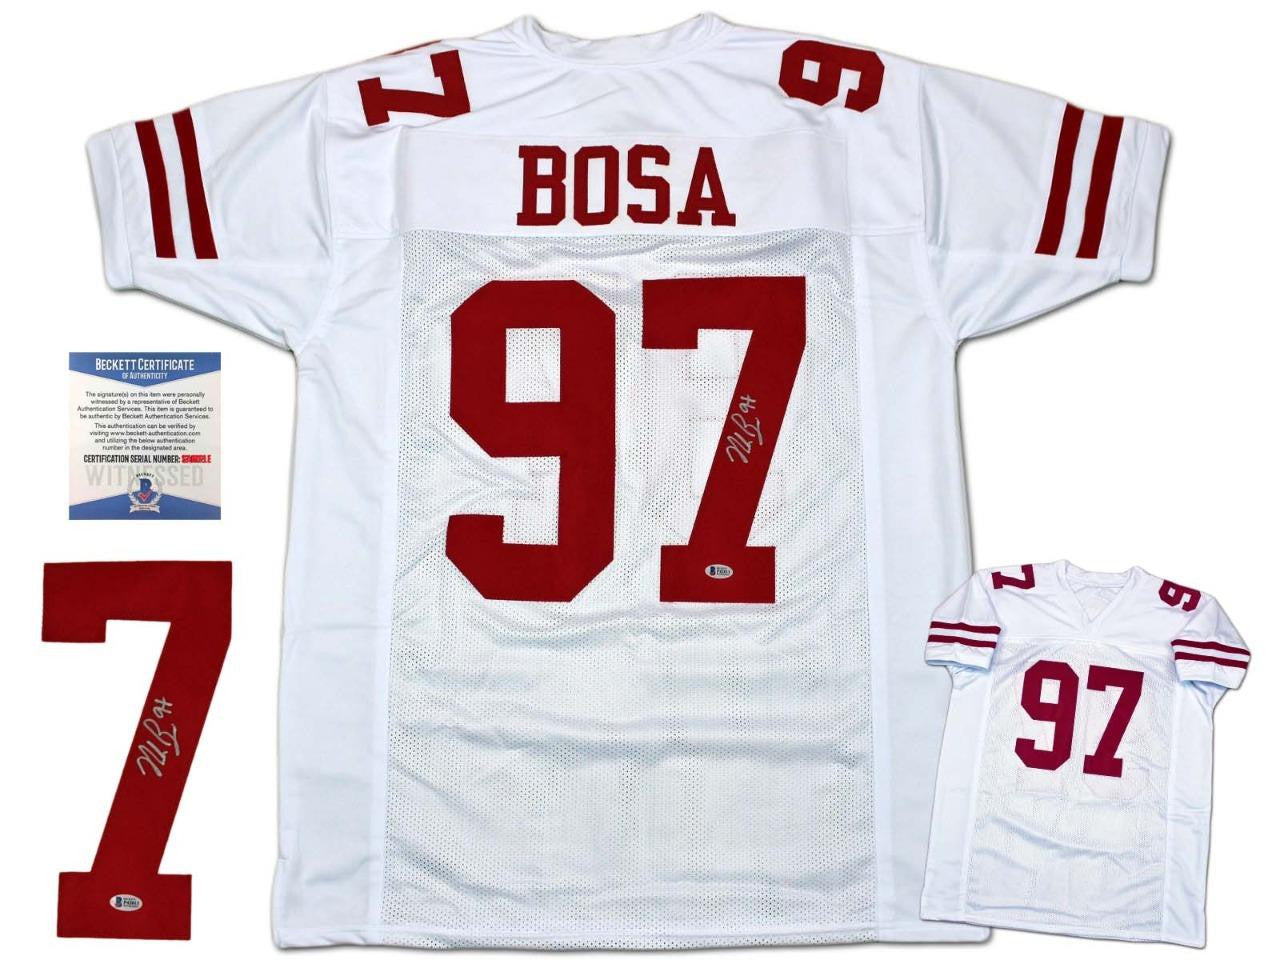 Nick Bosa Autographed Signed Jersey - White - Beckett Authentic